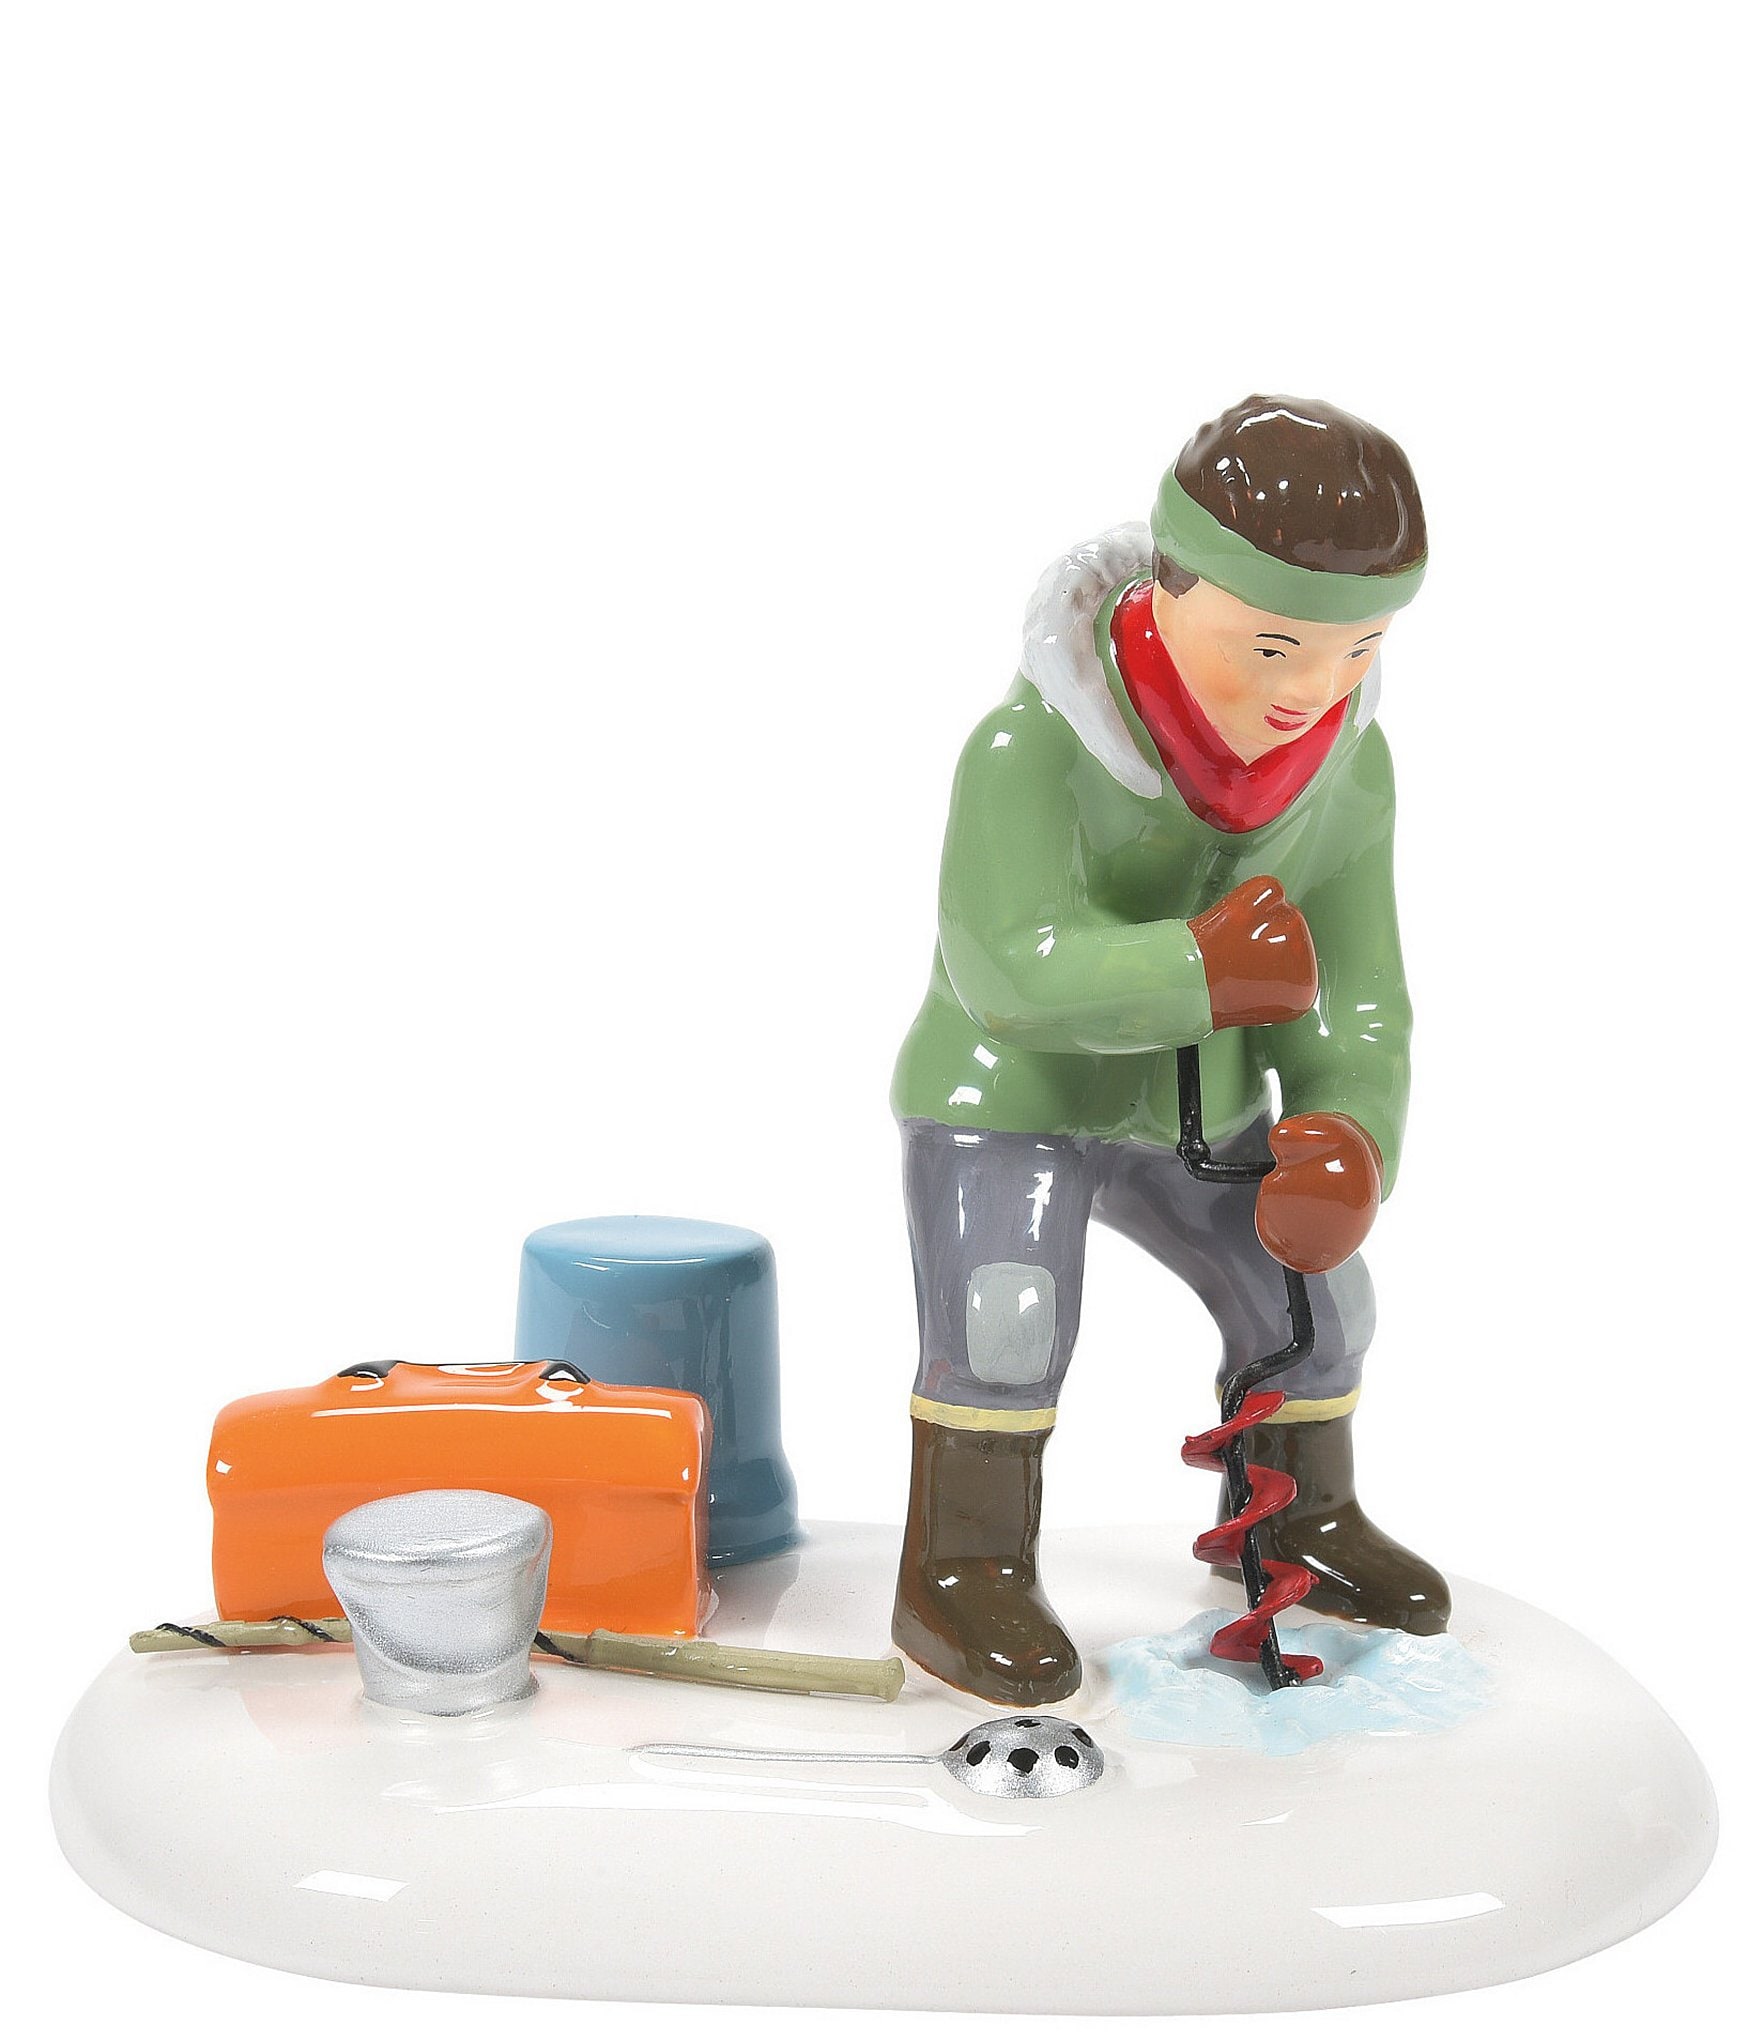 Department 56 Original Snow Village Collection Angling For A Win Figurine